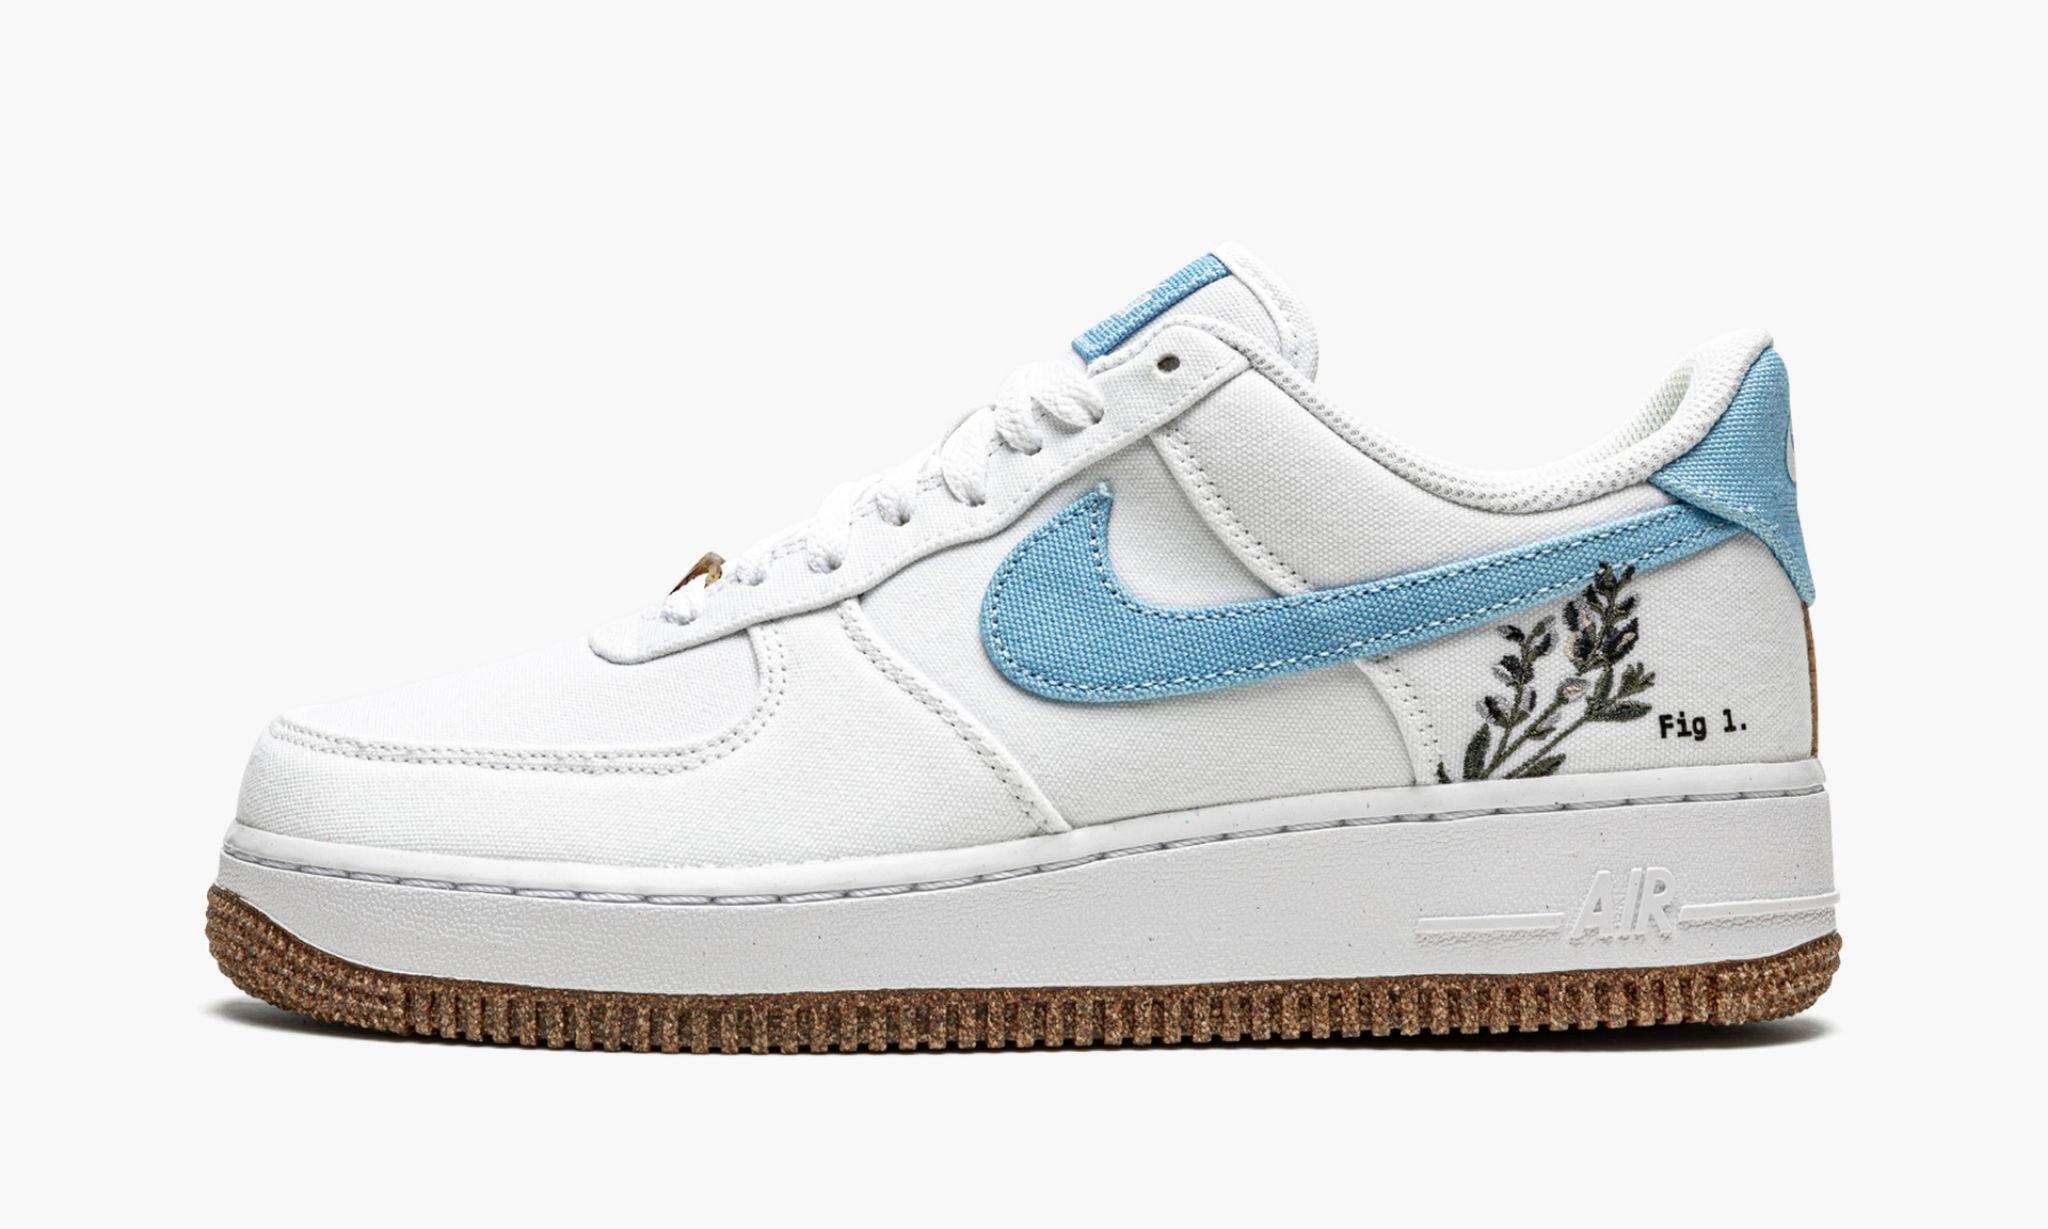 Nike Air Force 1 Low '07 "indigo" Shoes in White | Lyst